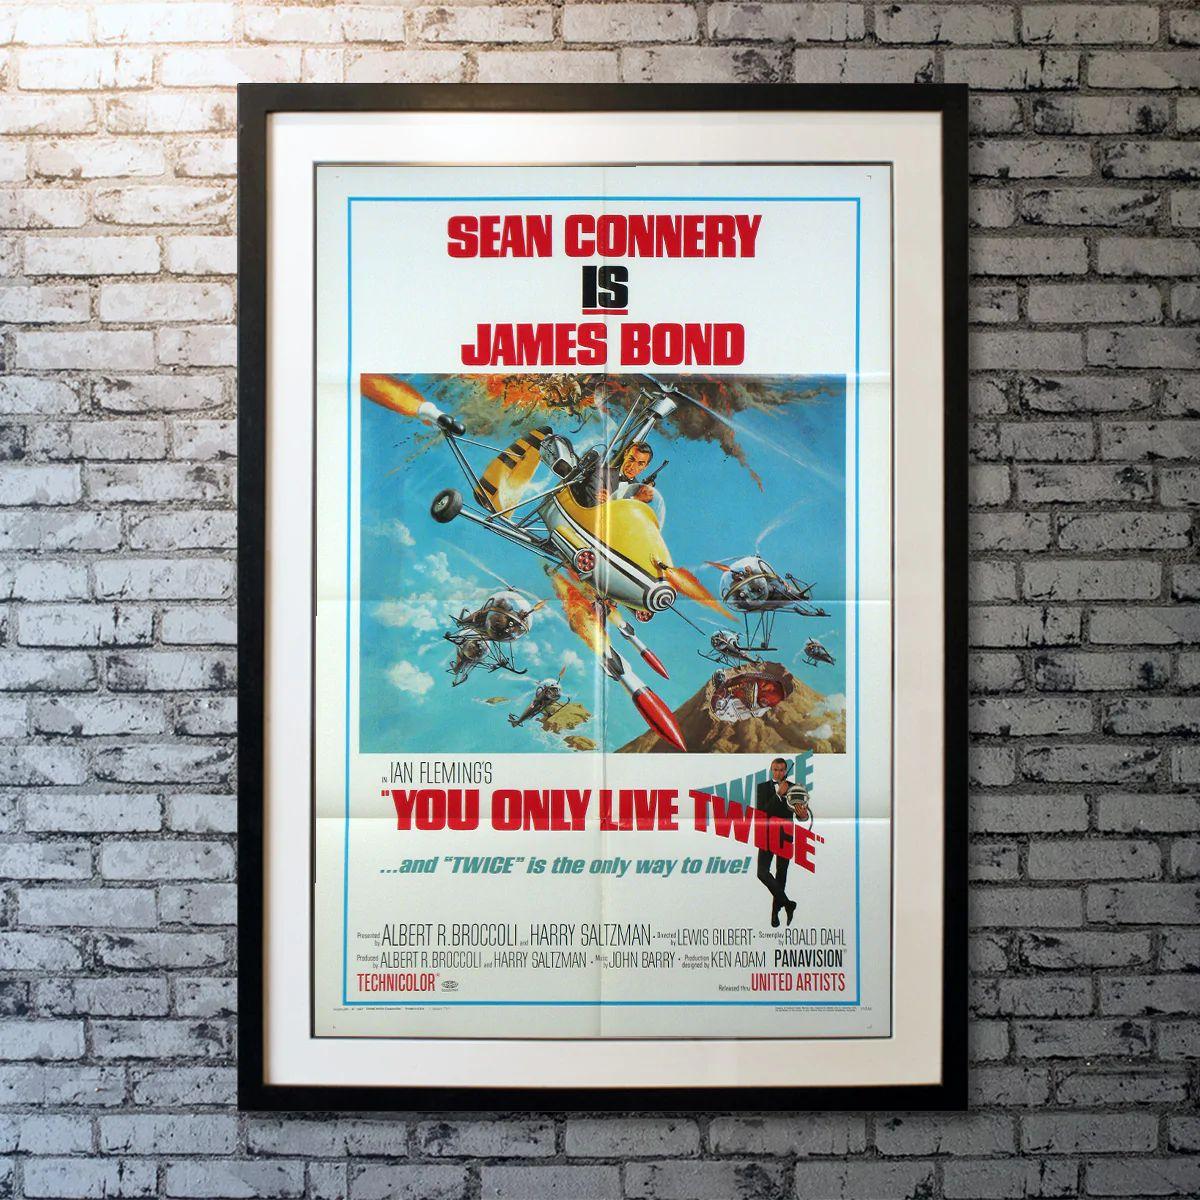 You Only Live Twice, Unframed Poster, 1967

Original One Sheet (27 X 41 Inches). James Bond and the Japanese Secret Service must find and stop the true culprit of a series of space hijackings, before war is provoked between Russia and the United